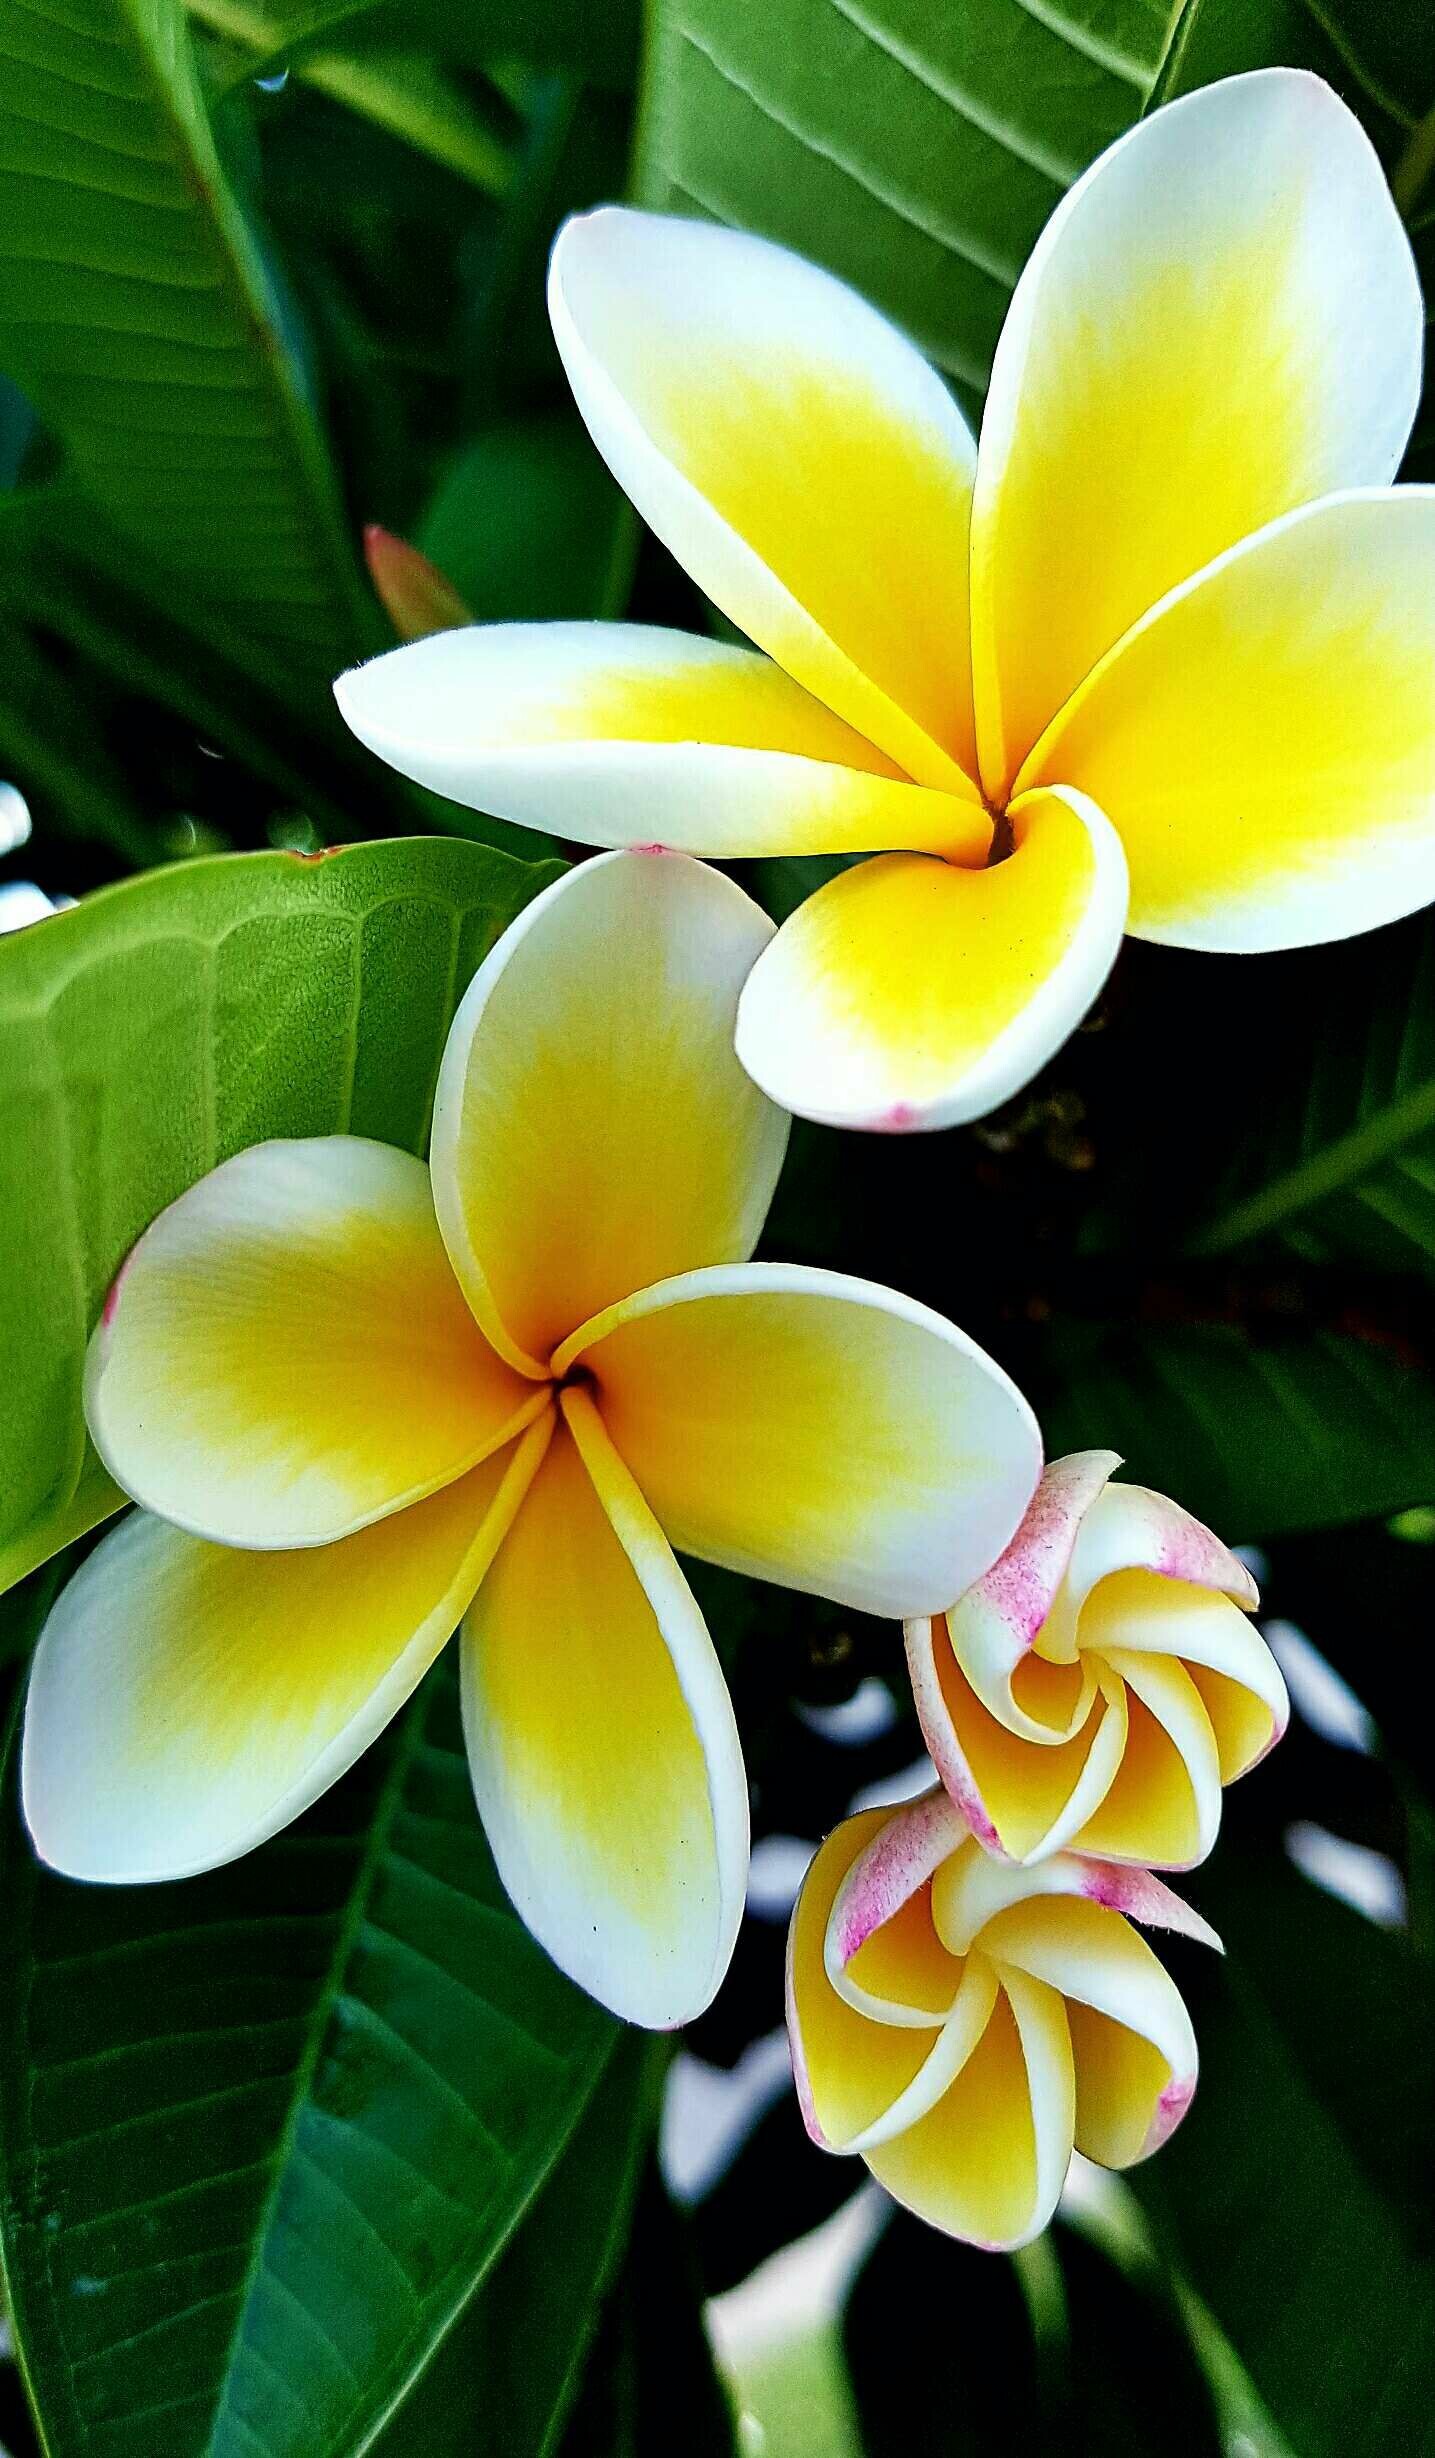 Frangipani Flower: The highly perfumed flowers have five petals, white or pink with a yellow centre, about 5cm in diameter and are grouped in clusters at the ends of the branches. 1440x2460 HD Wallpaper.